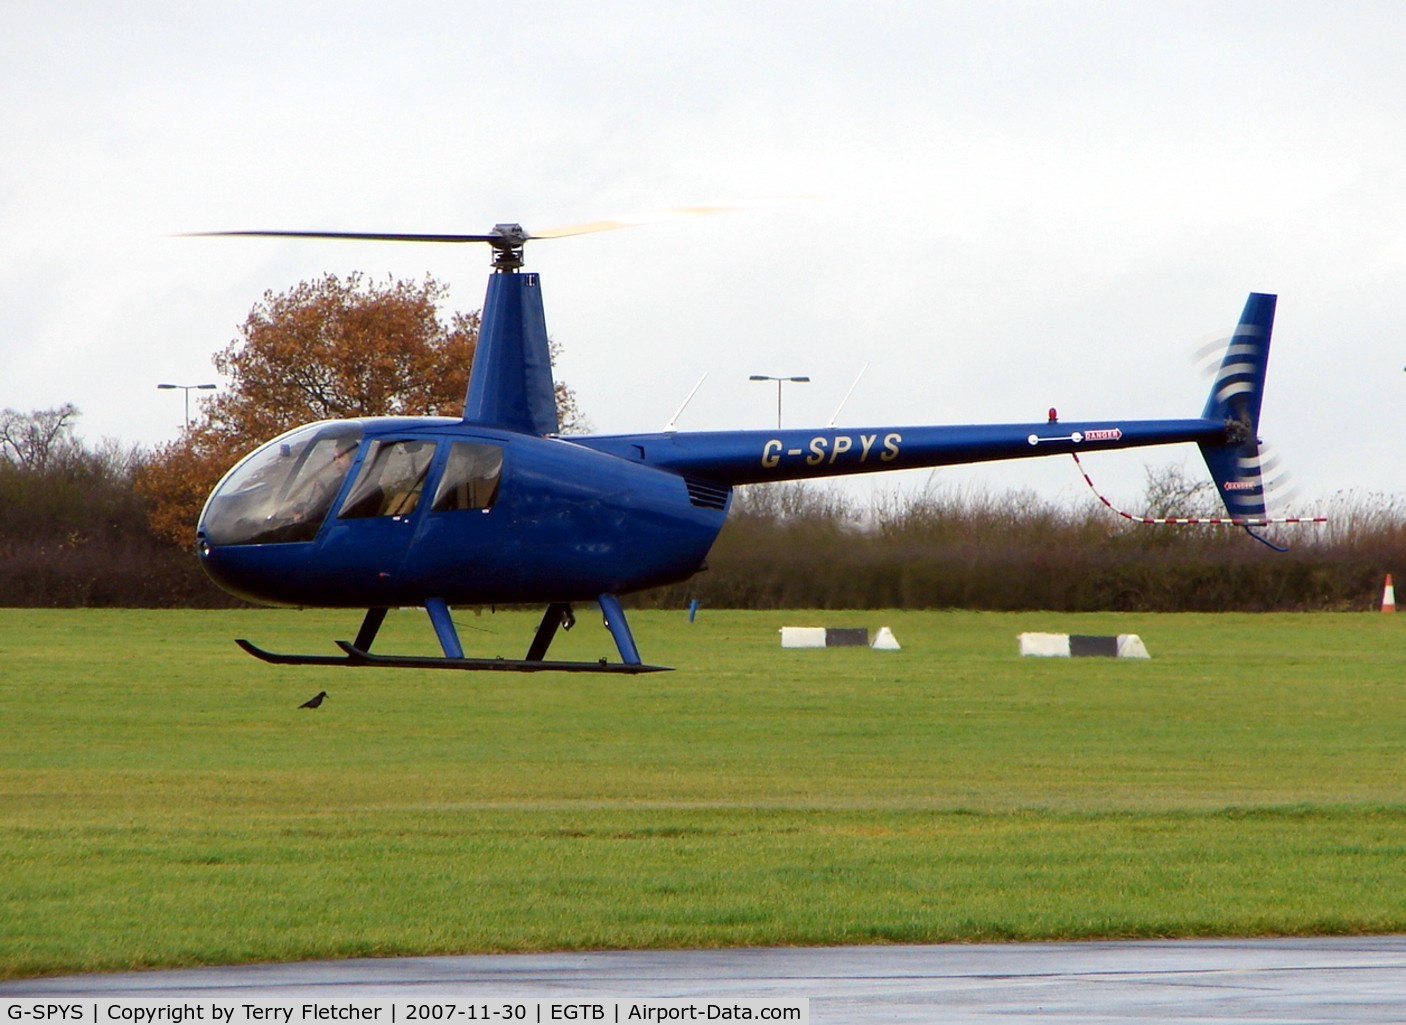 G-SPYS, 2006 Robinson R44 Raven II C/N 11274, at Wycombe Air Park - Booker Airfield